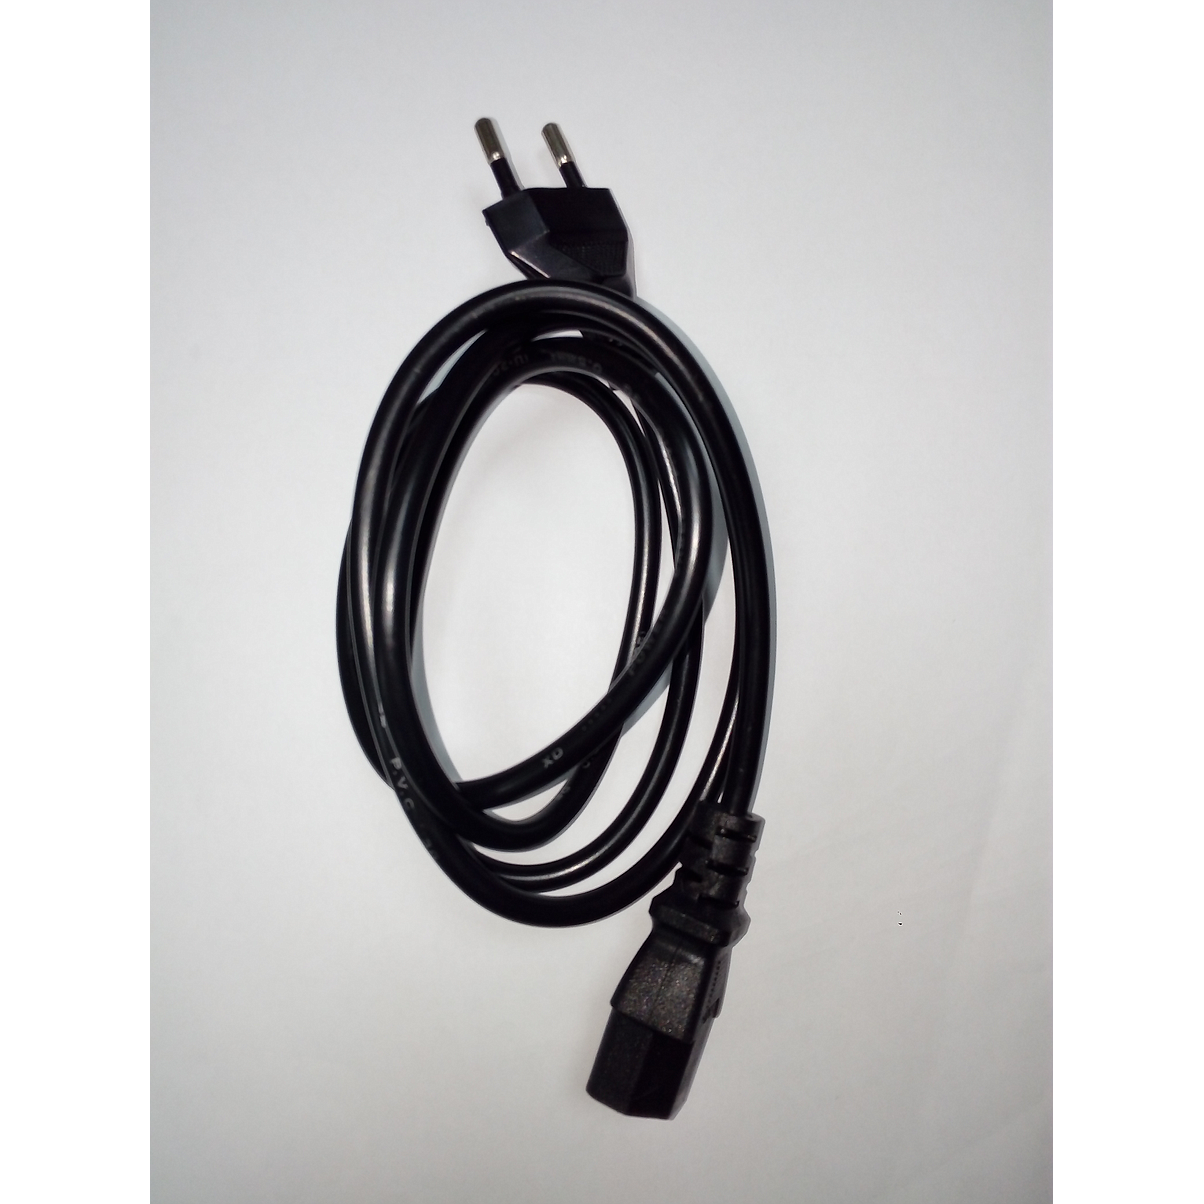 Strip light the power adapter 12V 5A Europe  Cable